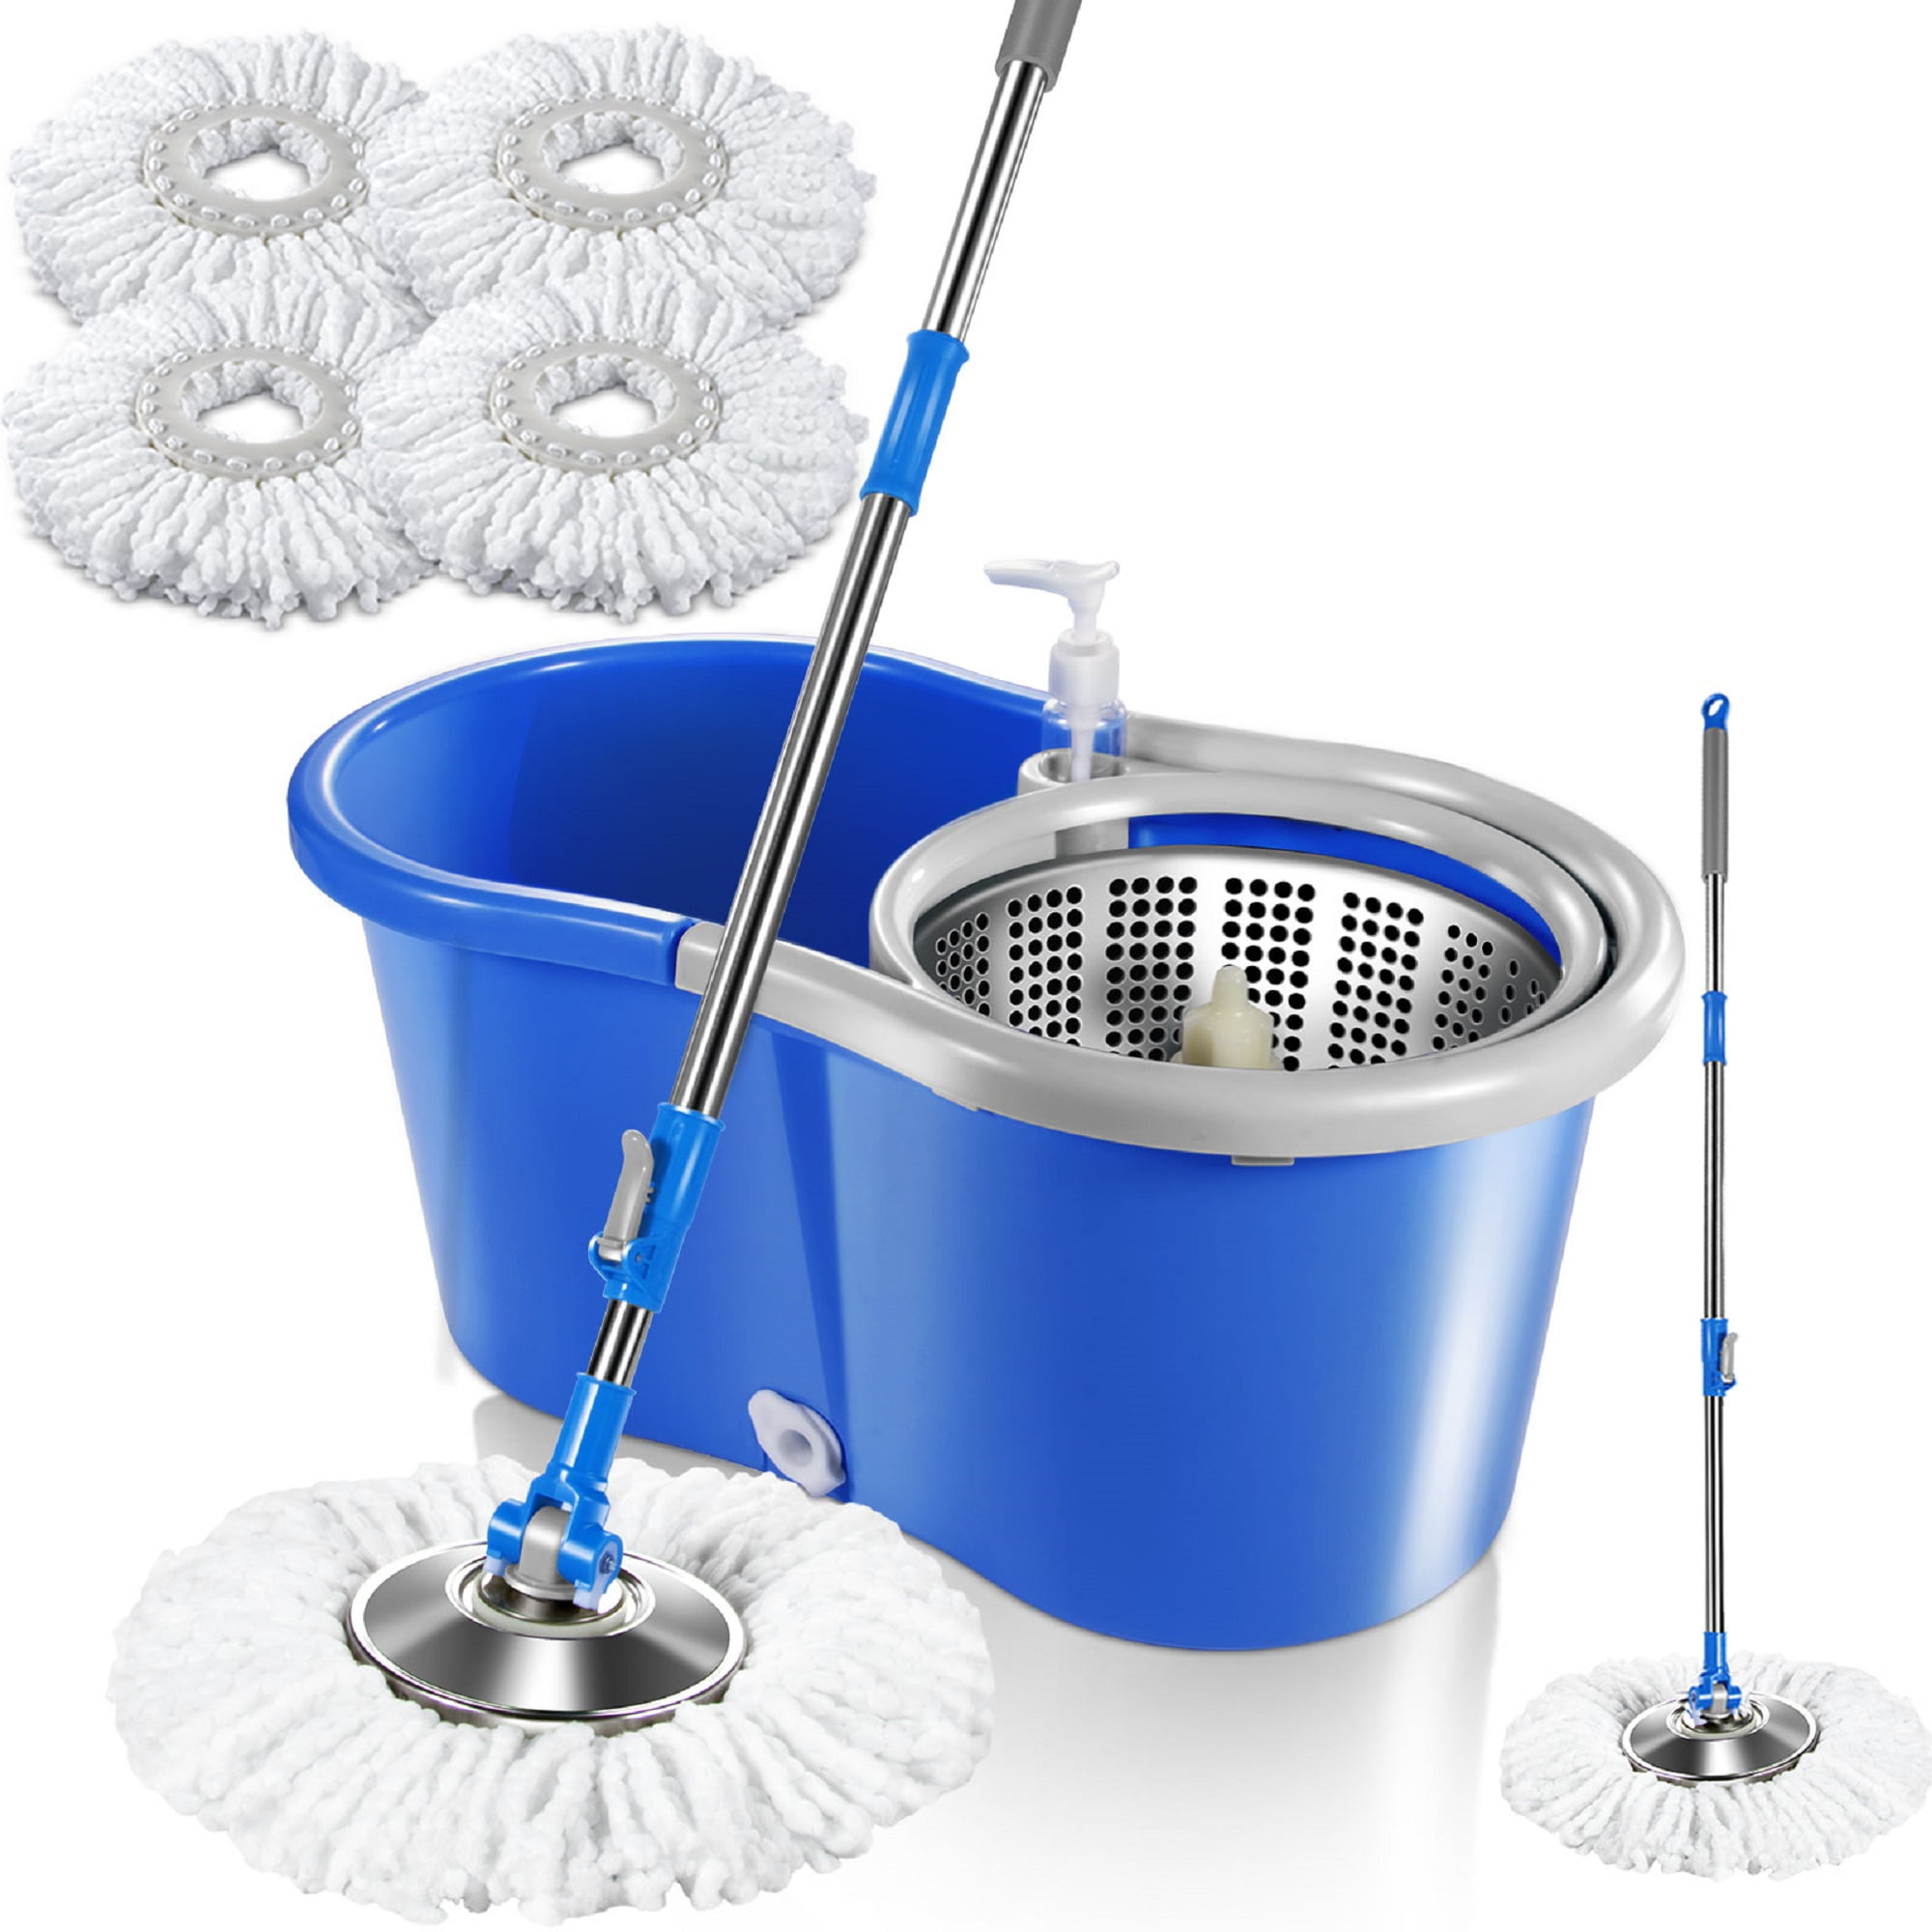 Tsmine Spin Mop Bucket System Stainless Steel Deluxe 360 Spinning Mop Bucket Floor Cleaning System with 6 Microfiber Replacement Head Refills